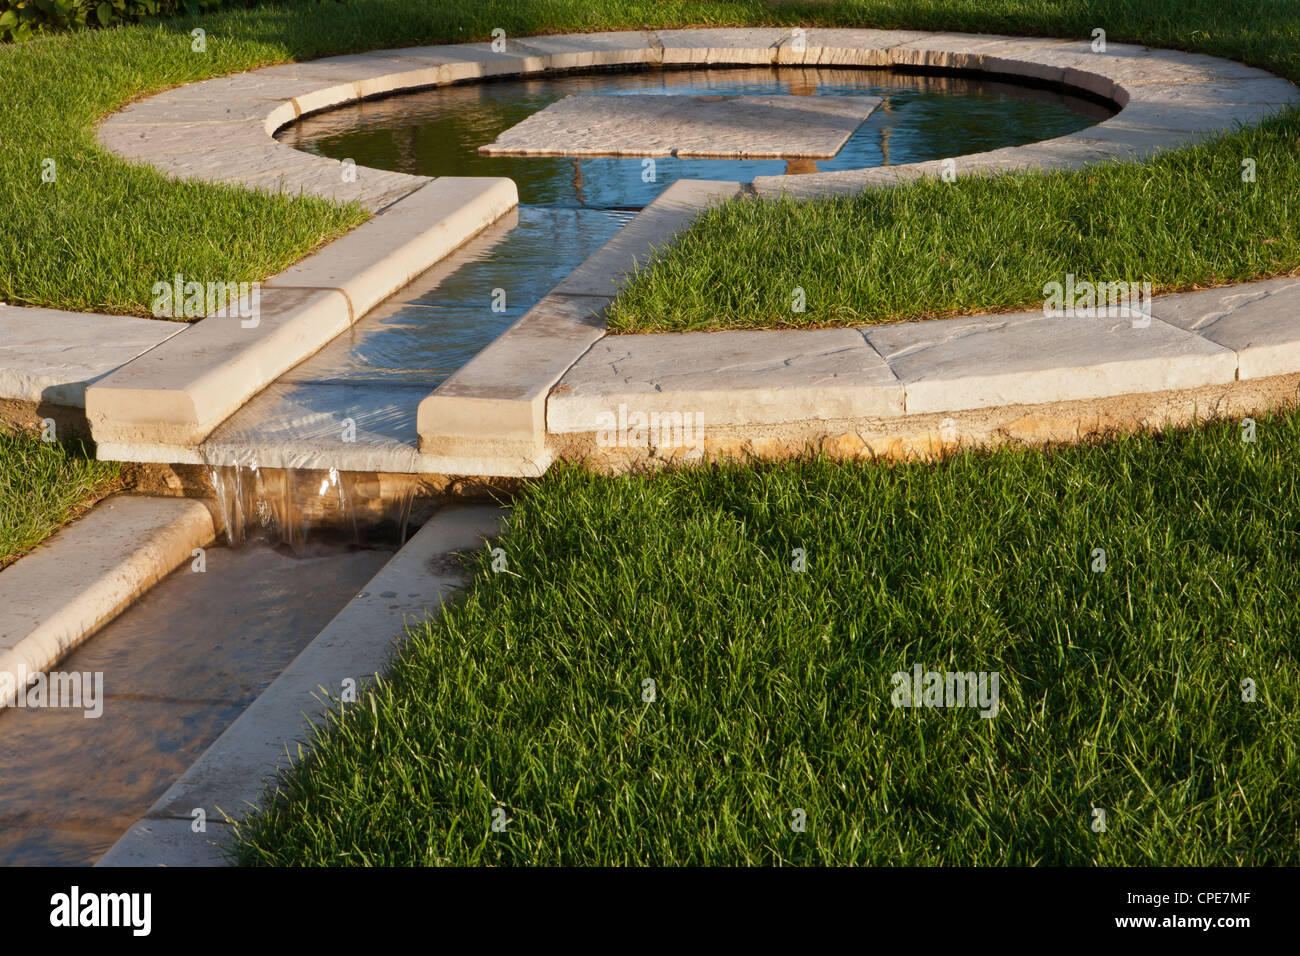 a garden with a circle circular pond garden rill water feature made from stone and paved paving borders lawn lawns UK Stock Photo